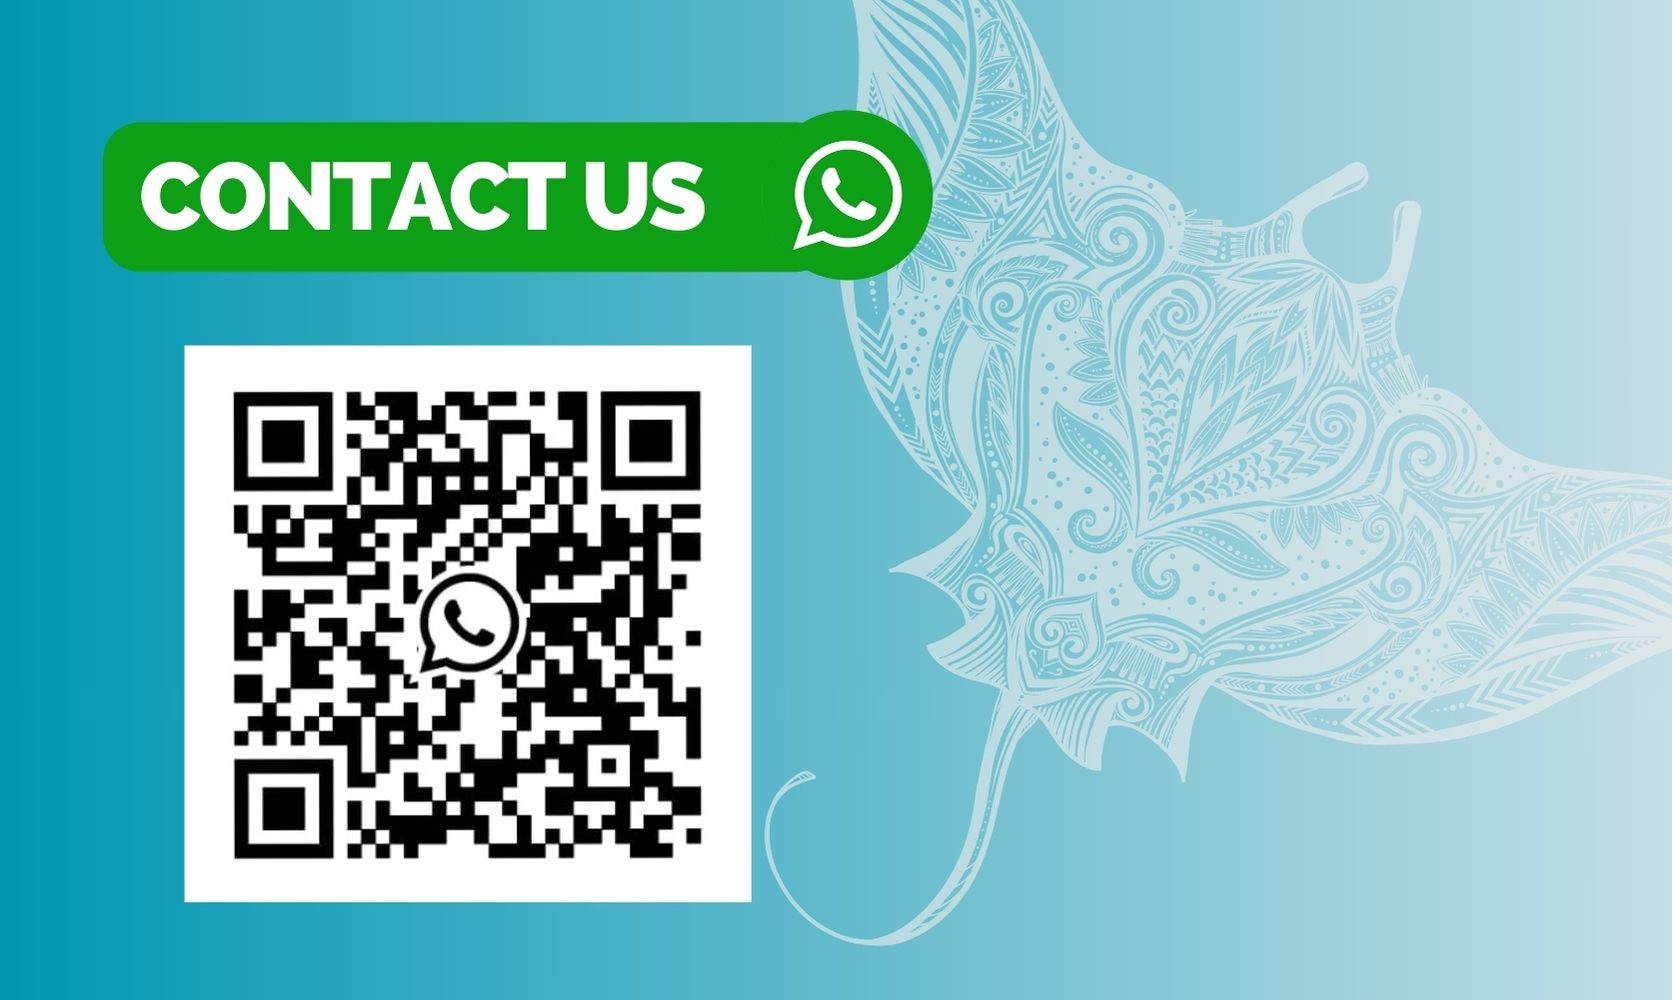 Contact us by whatsapp